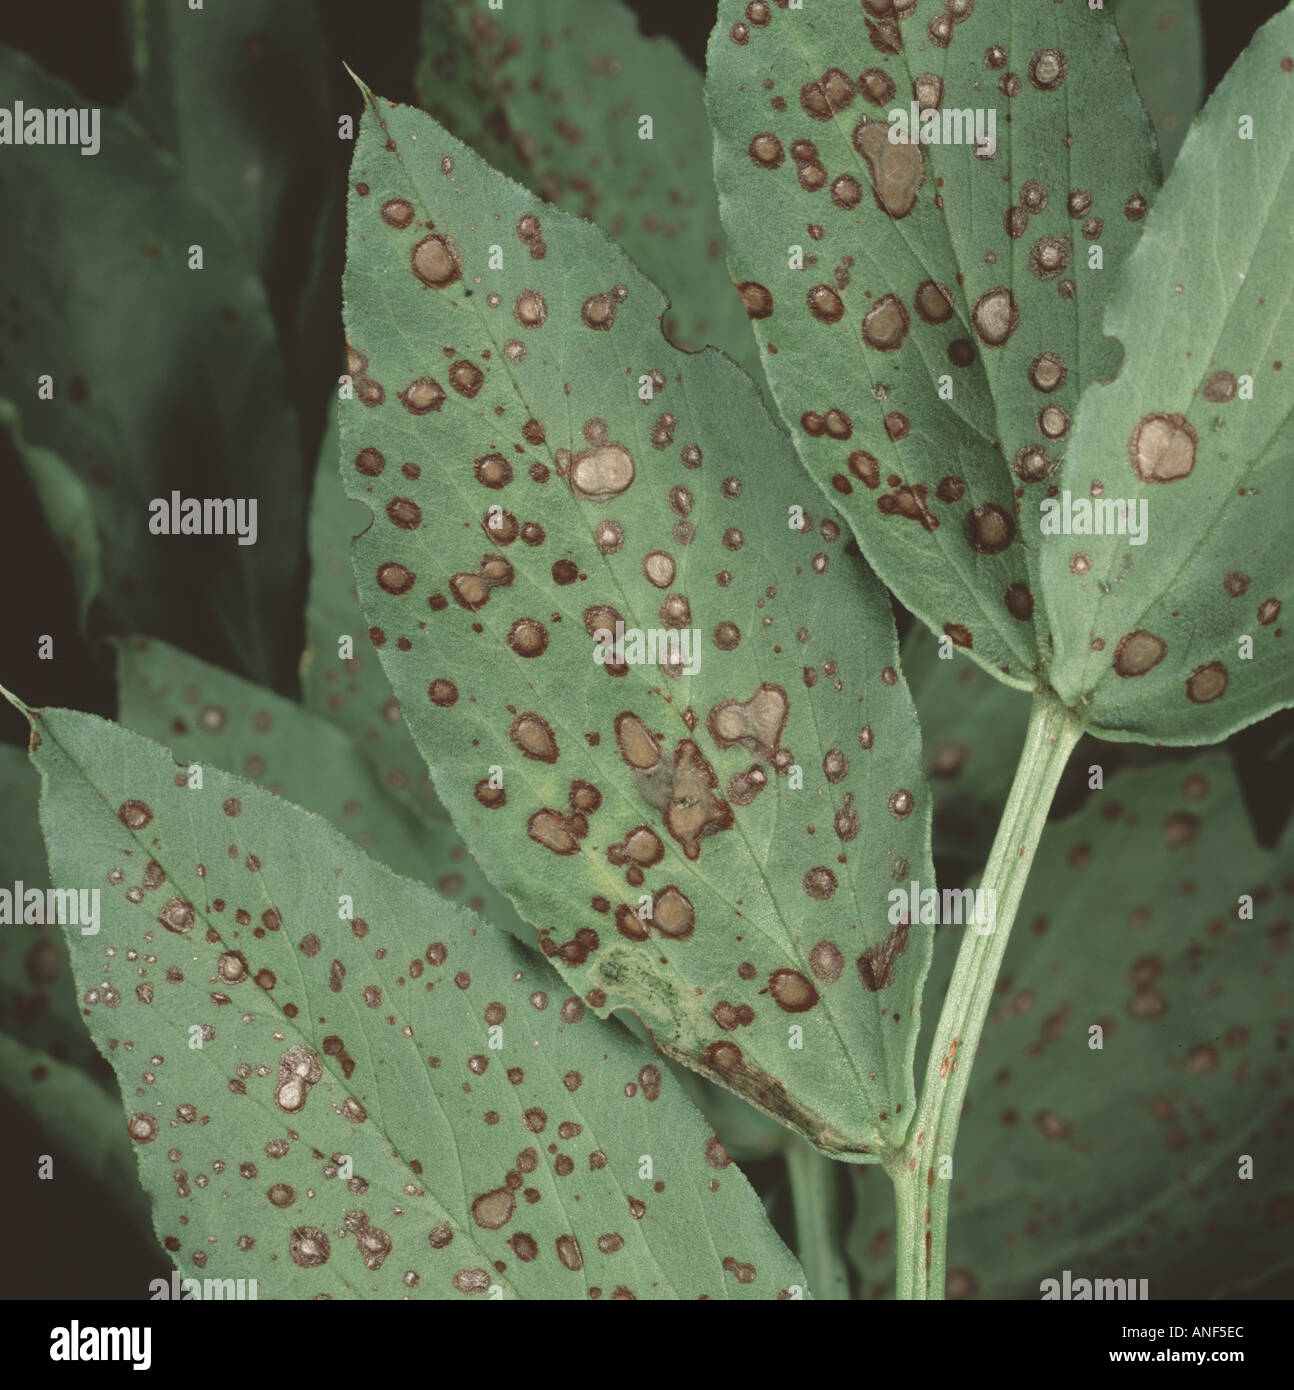 Chocolate spot Botrytis fabae lesions on field or broad bean leaves Vicia faba Stock Photo